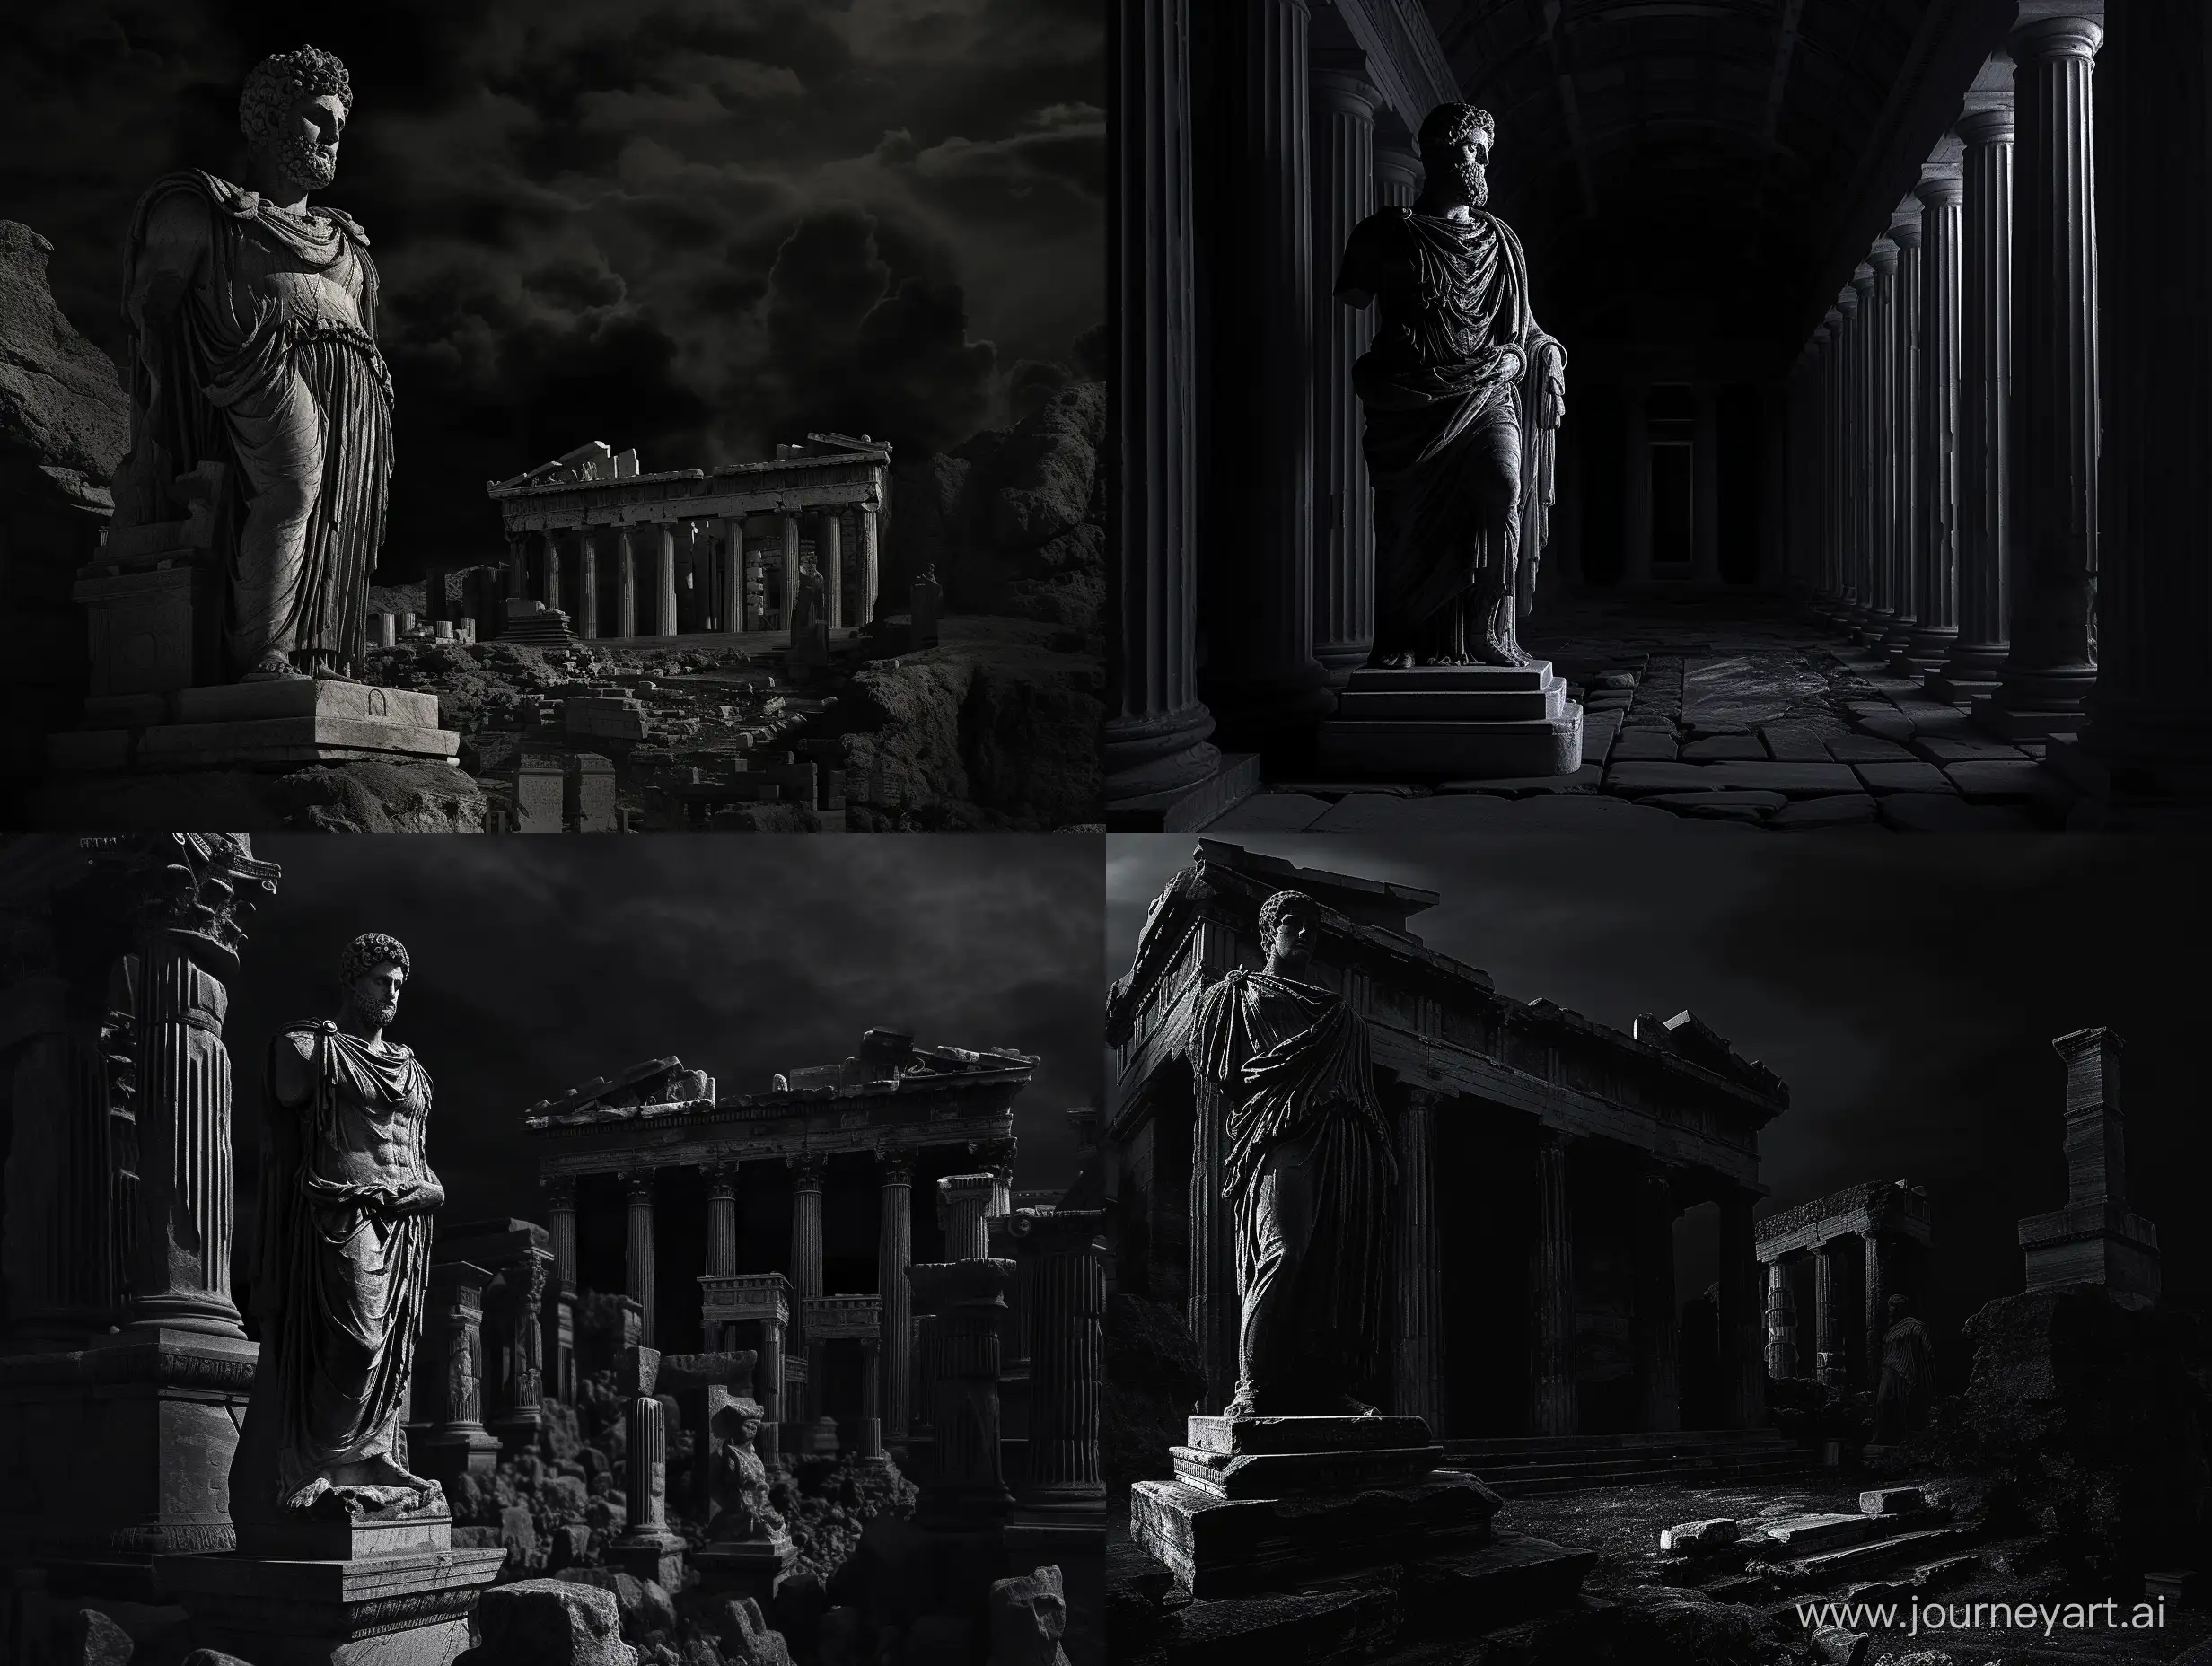 A dark landscape image of an ancient greek society deeply connected to stoicism, black and white, ancient greek architecture, include one single big statue of a stereotypical strong greek man, marcus aurelius